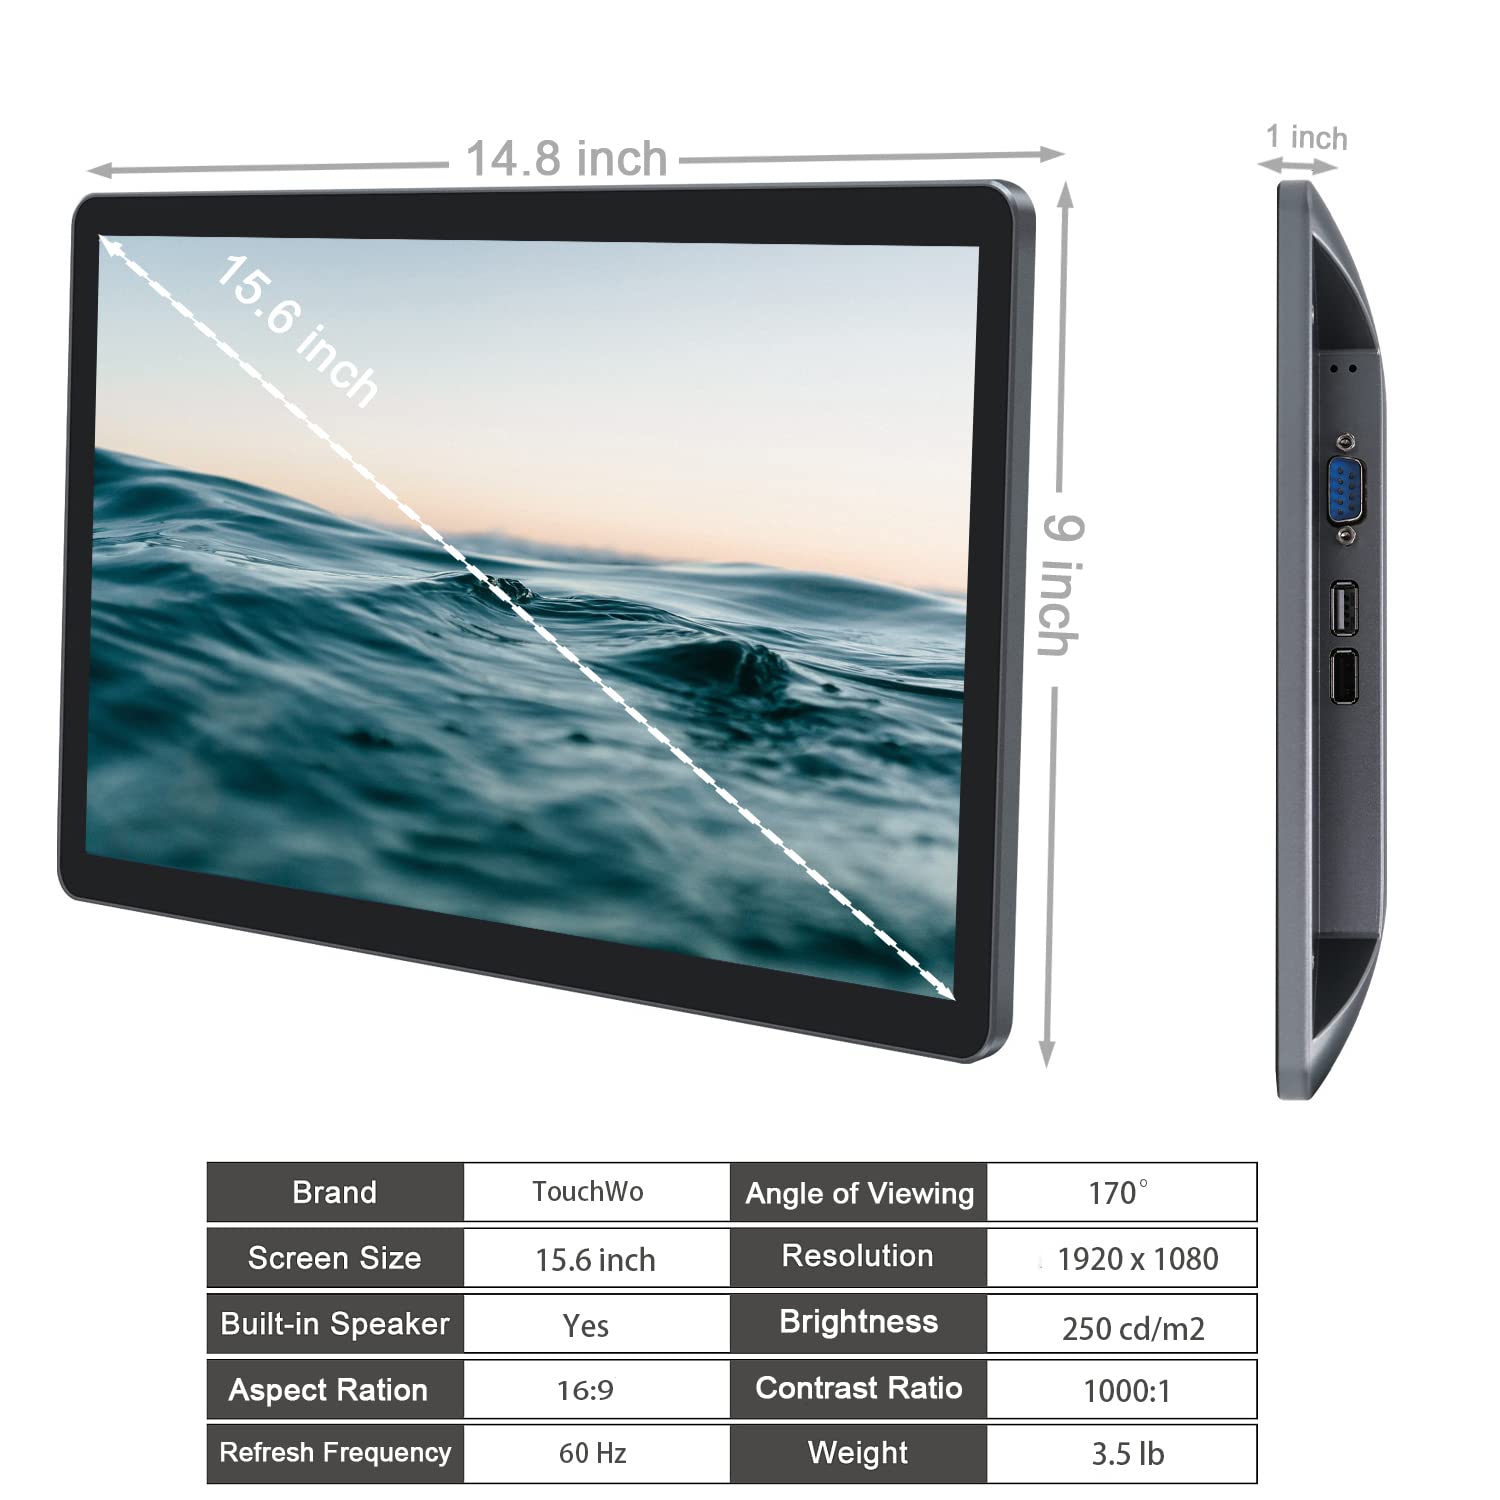 TouchWo 15.6 inch Touchscreen Monitor, Android All-in-One PC Touchscreen Computer, Built-in Speakers, WiFi & BT, RK3568 RAM 2G & ROM 16G, HD-MI Monitor for POS, Menu Screen, Digital Picture Fram